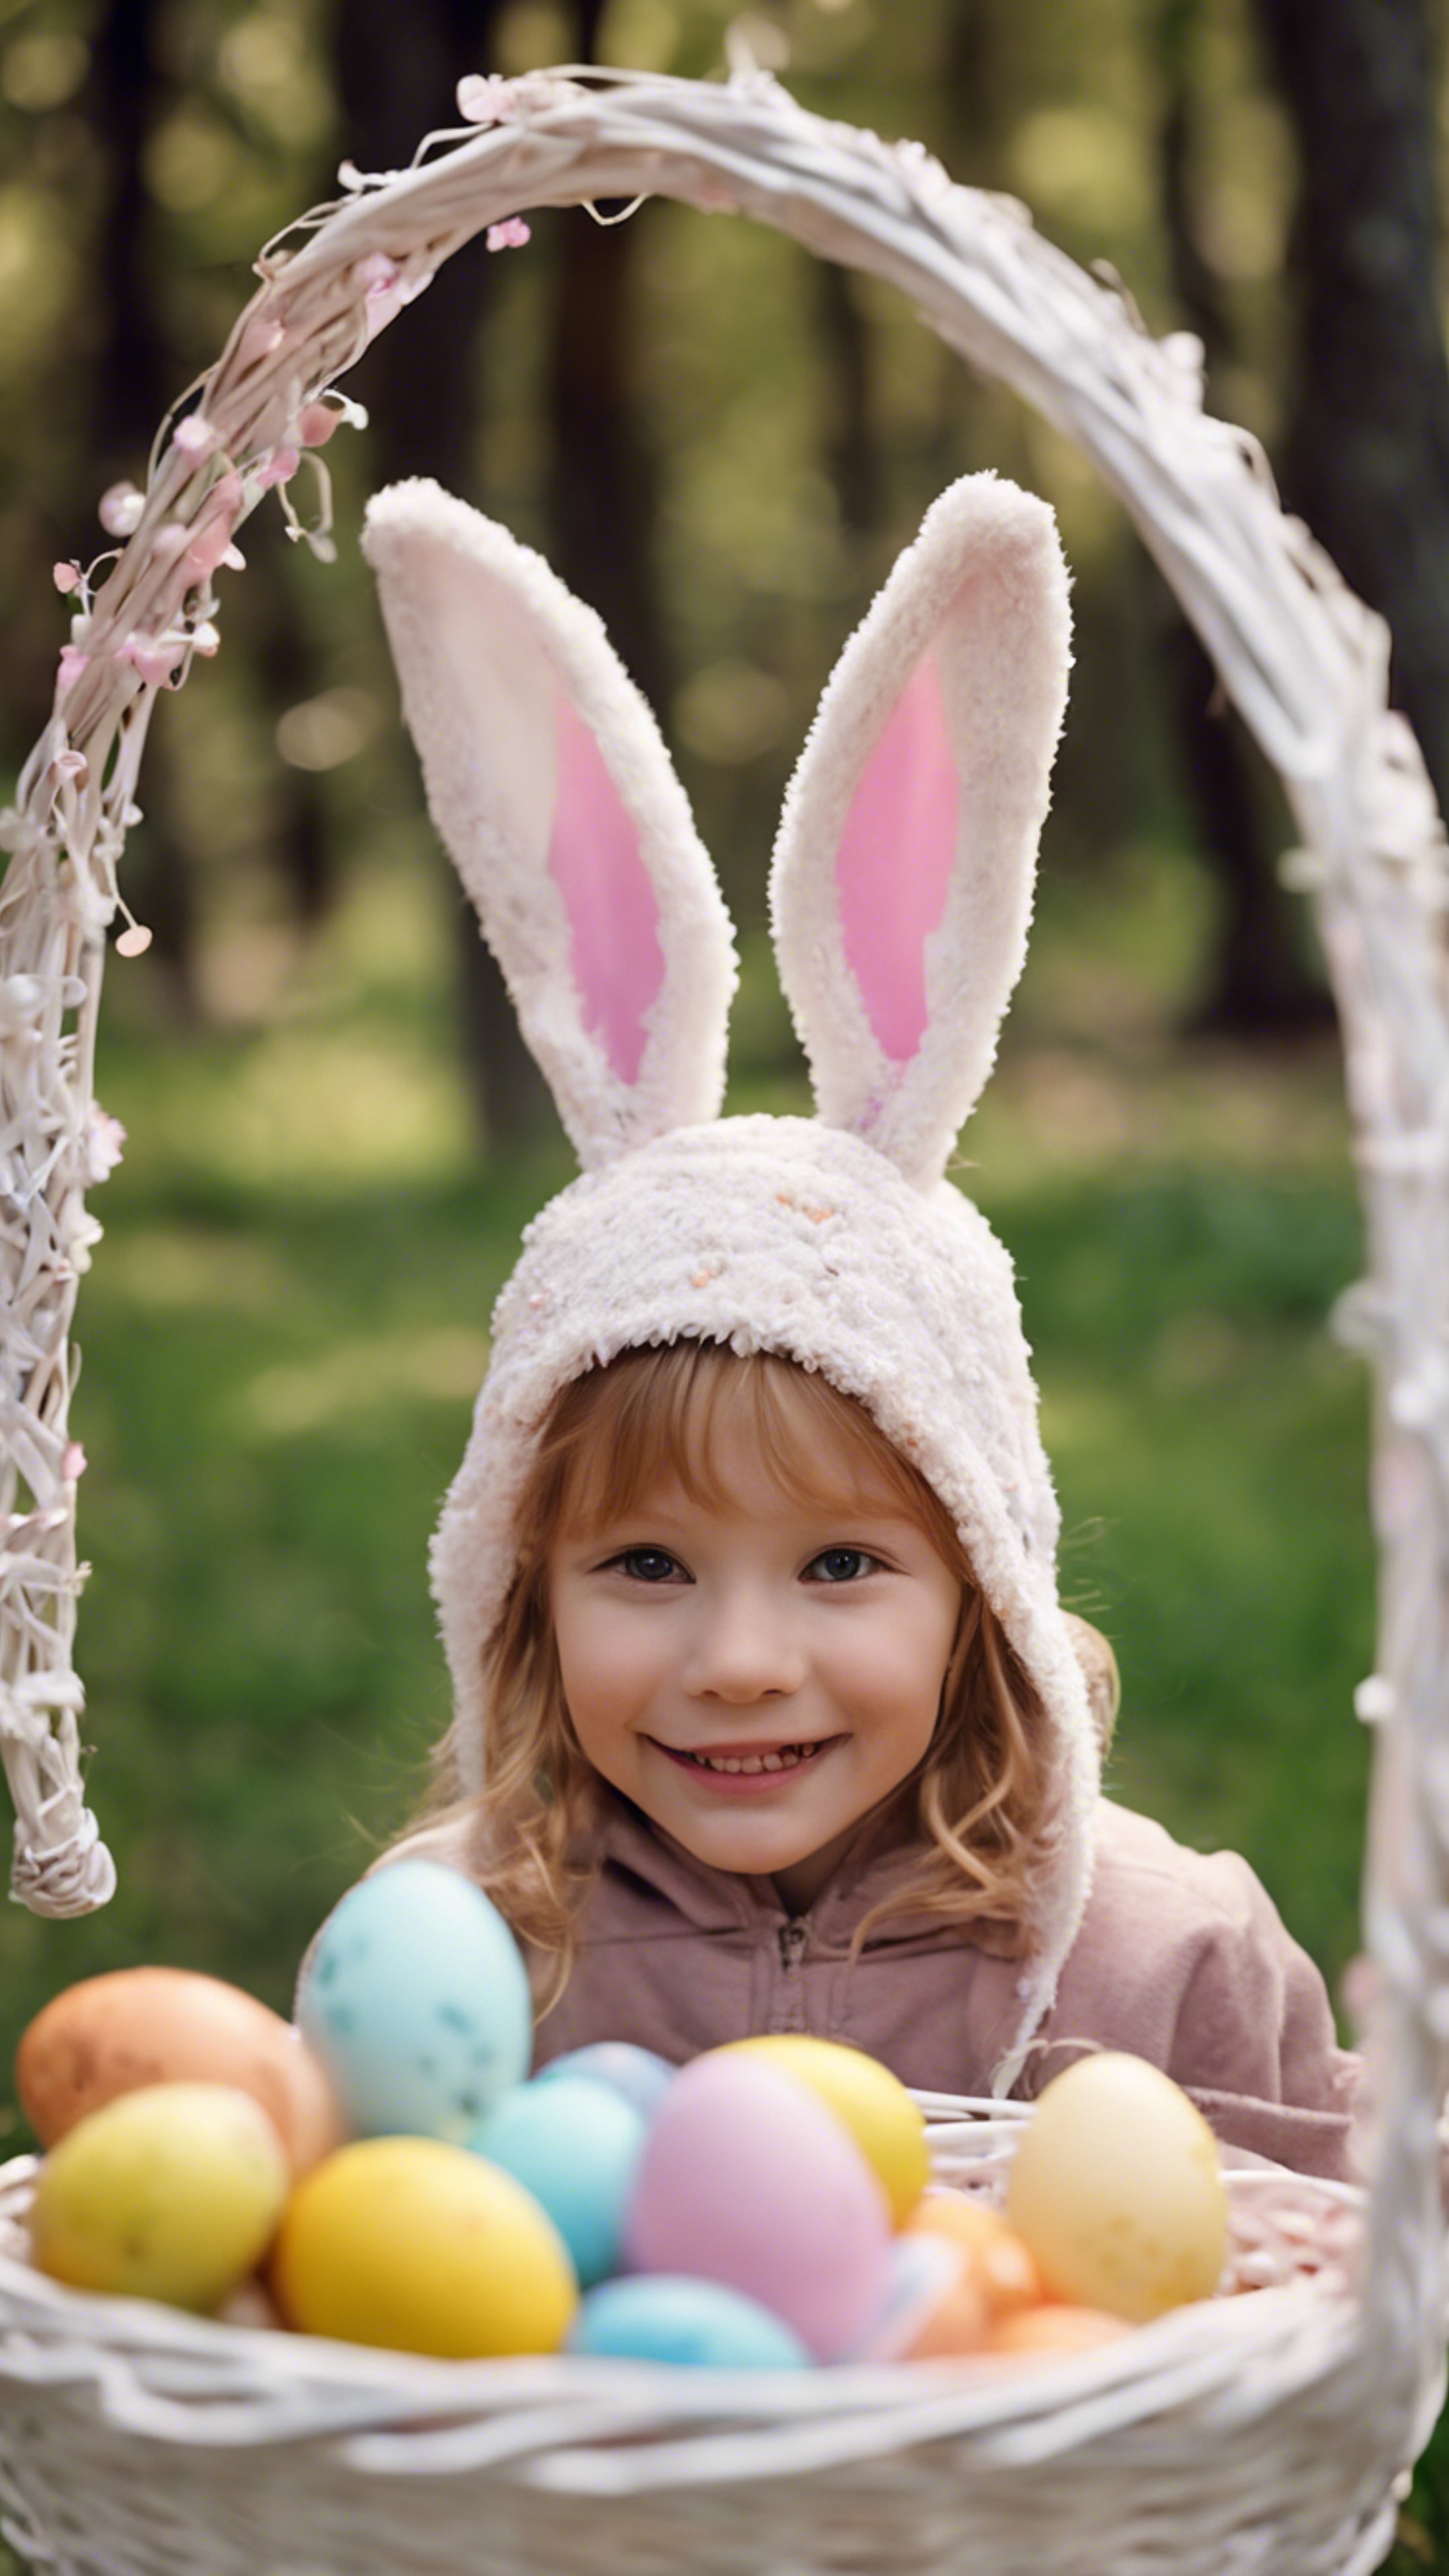 A child wearing bunny ears, excitedly looking at a beautifully decorated Easter basket.壁紙[a9a74b0a32164484a058]